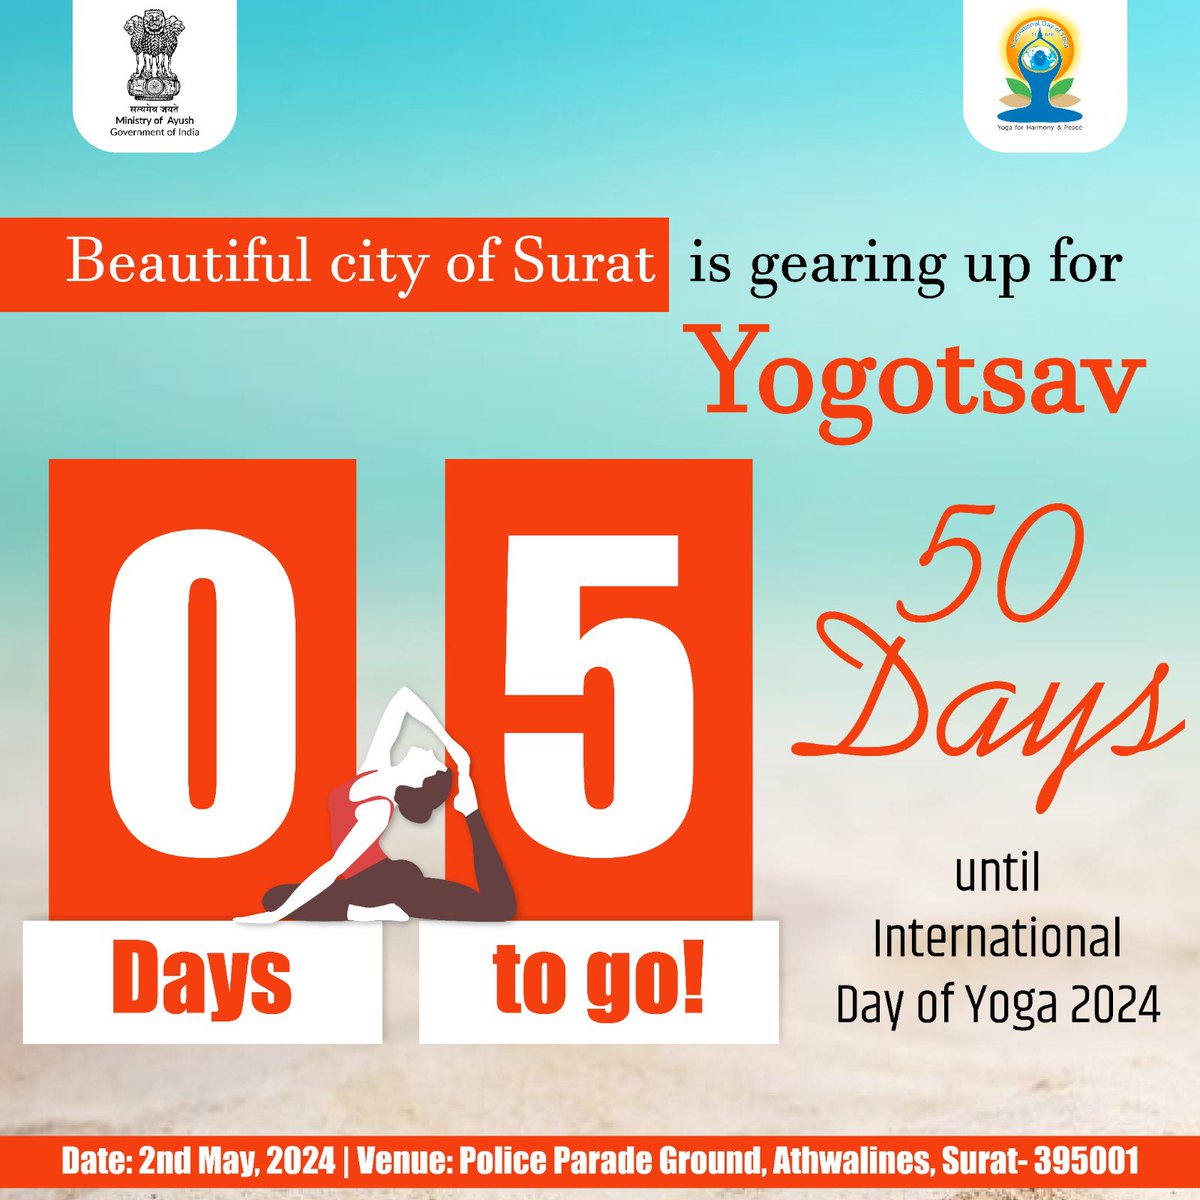 As the #InternationalDayofYoga2024 countdown continues, Surat is getting ready to host a spectacular event on 2nd May 2024, at the Police Parade Ground, Athwalines. Join Surat in this exciting celebration of yoga and mark your calendars for an unforgettable experience.